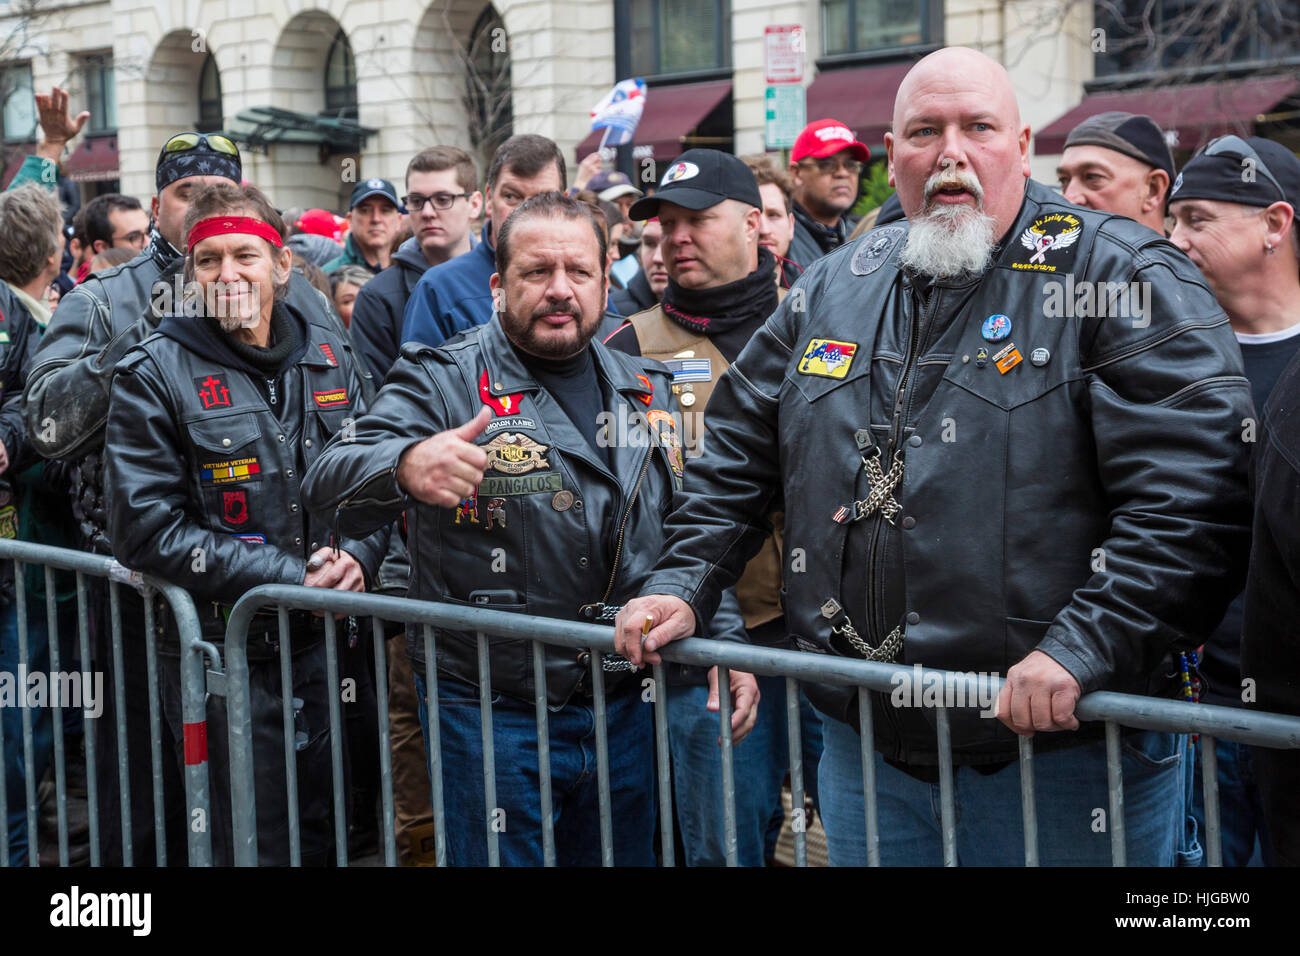 Washington, DC USA - 20 January 2017 - Members of Bikers for Trump wait in line for a security screening before Donald Trump's inaugural ceremony. Stock Photo